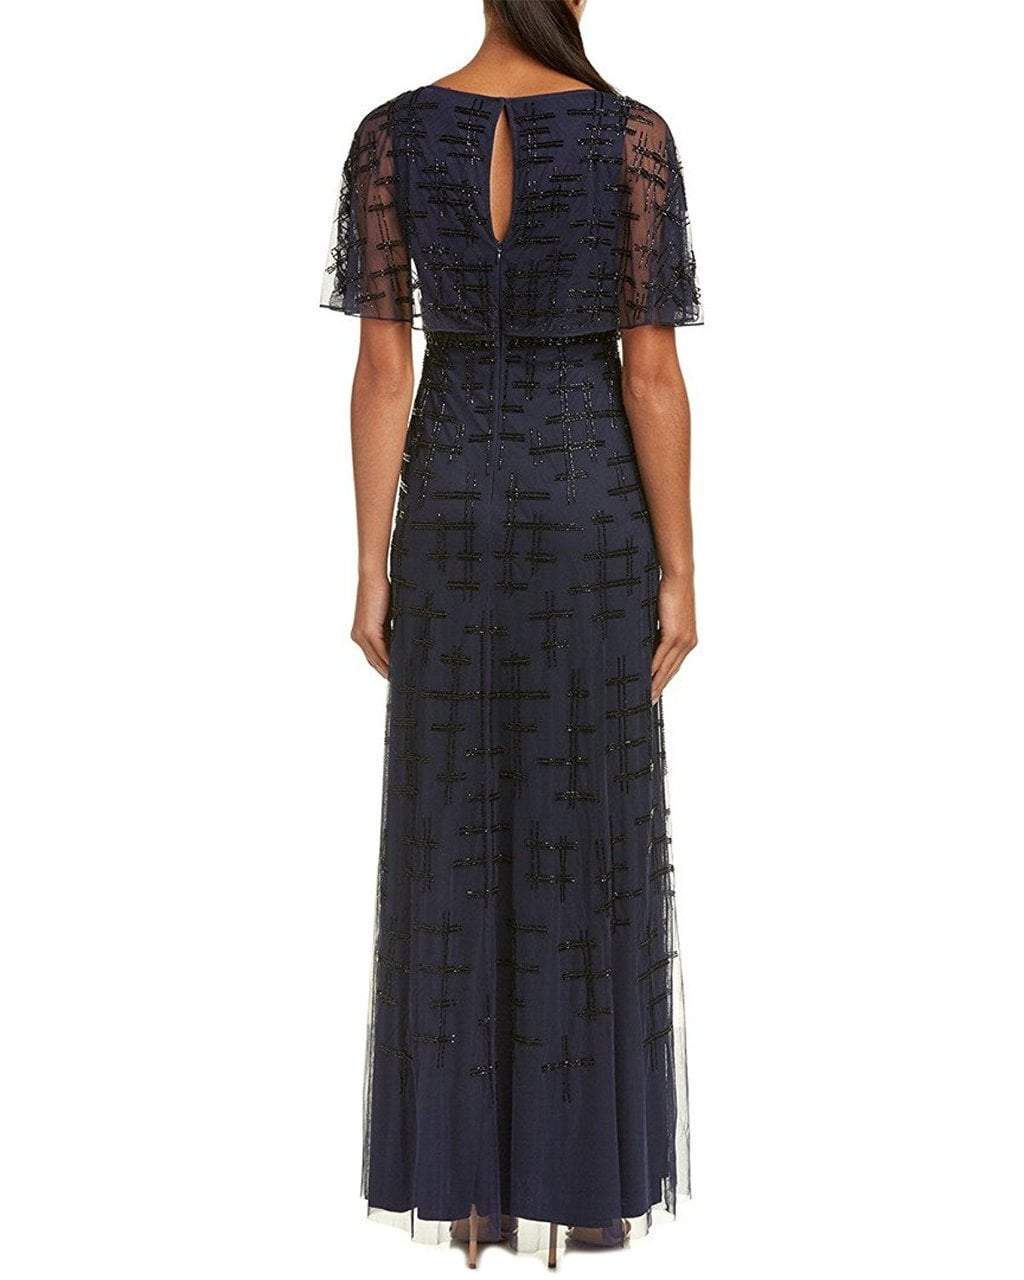 Aidan Mattox - MD1E201195 Short Flutter Sleeve Adorned Capelet Gown in Blue and Black